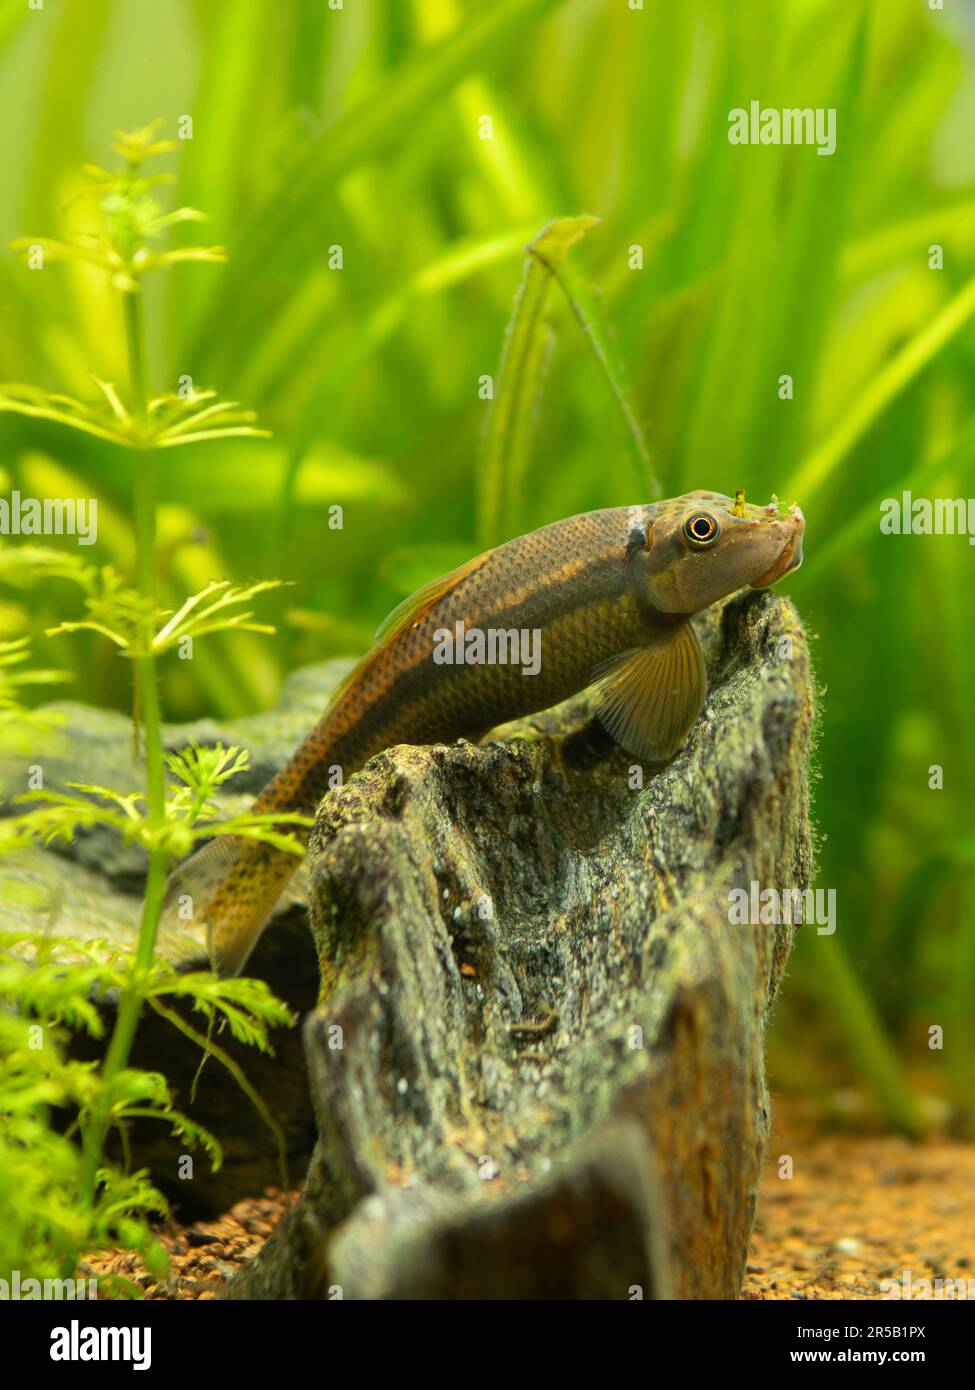 selective focus of a Chinese Algae Eater (Gyrinocheilus aymonieri) in fish tank with blurred background Stock Photo